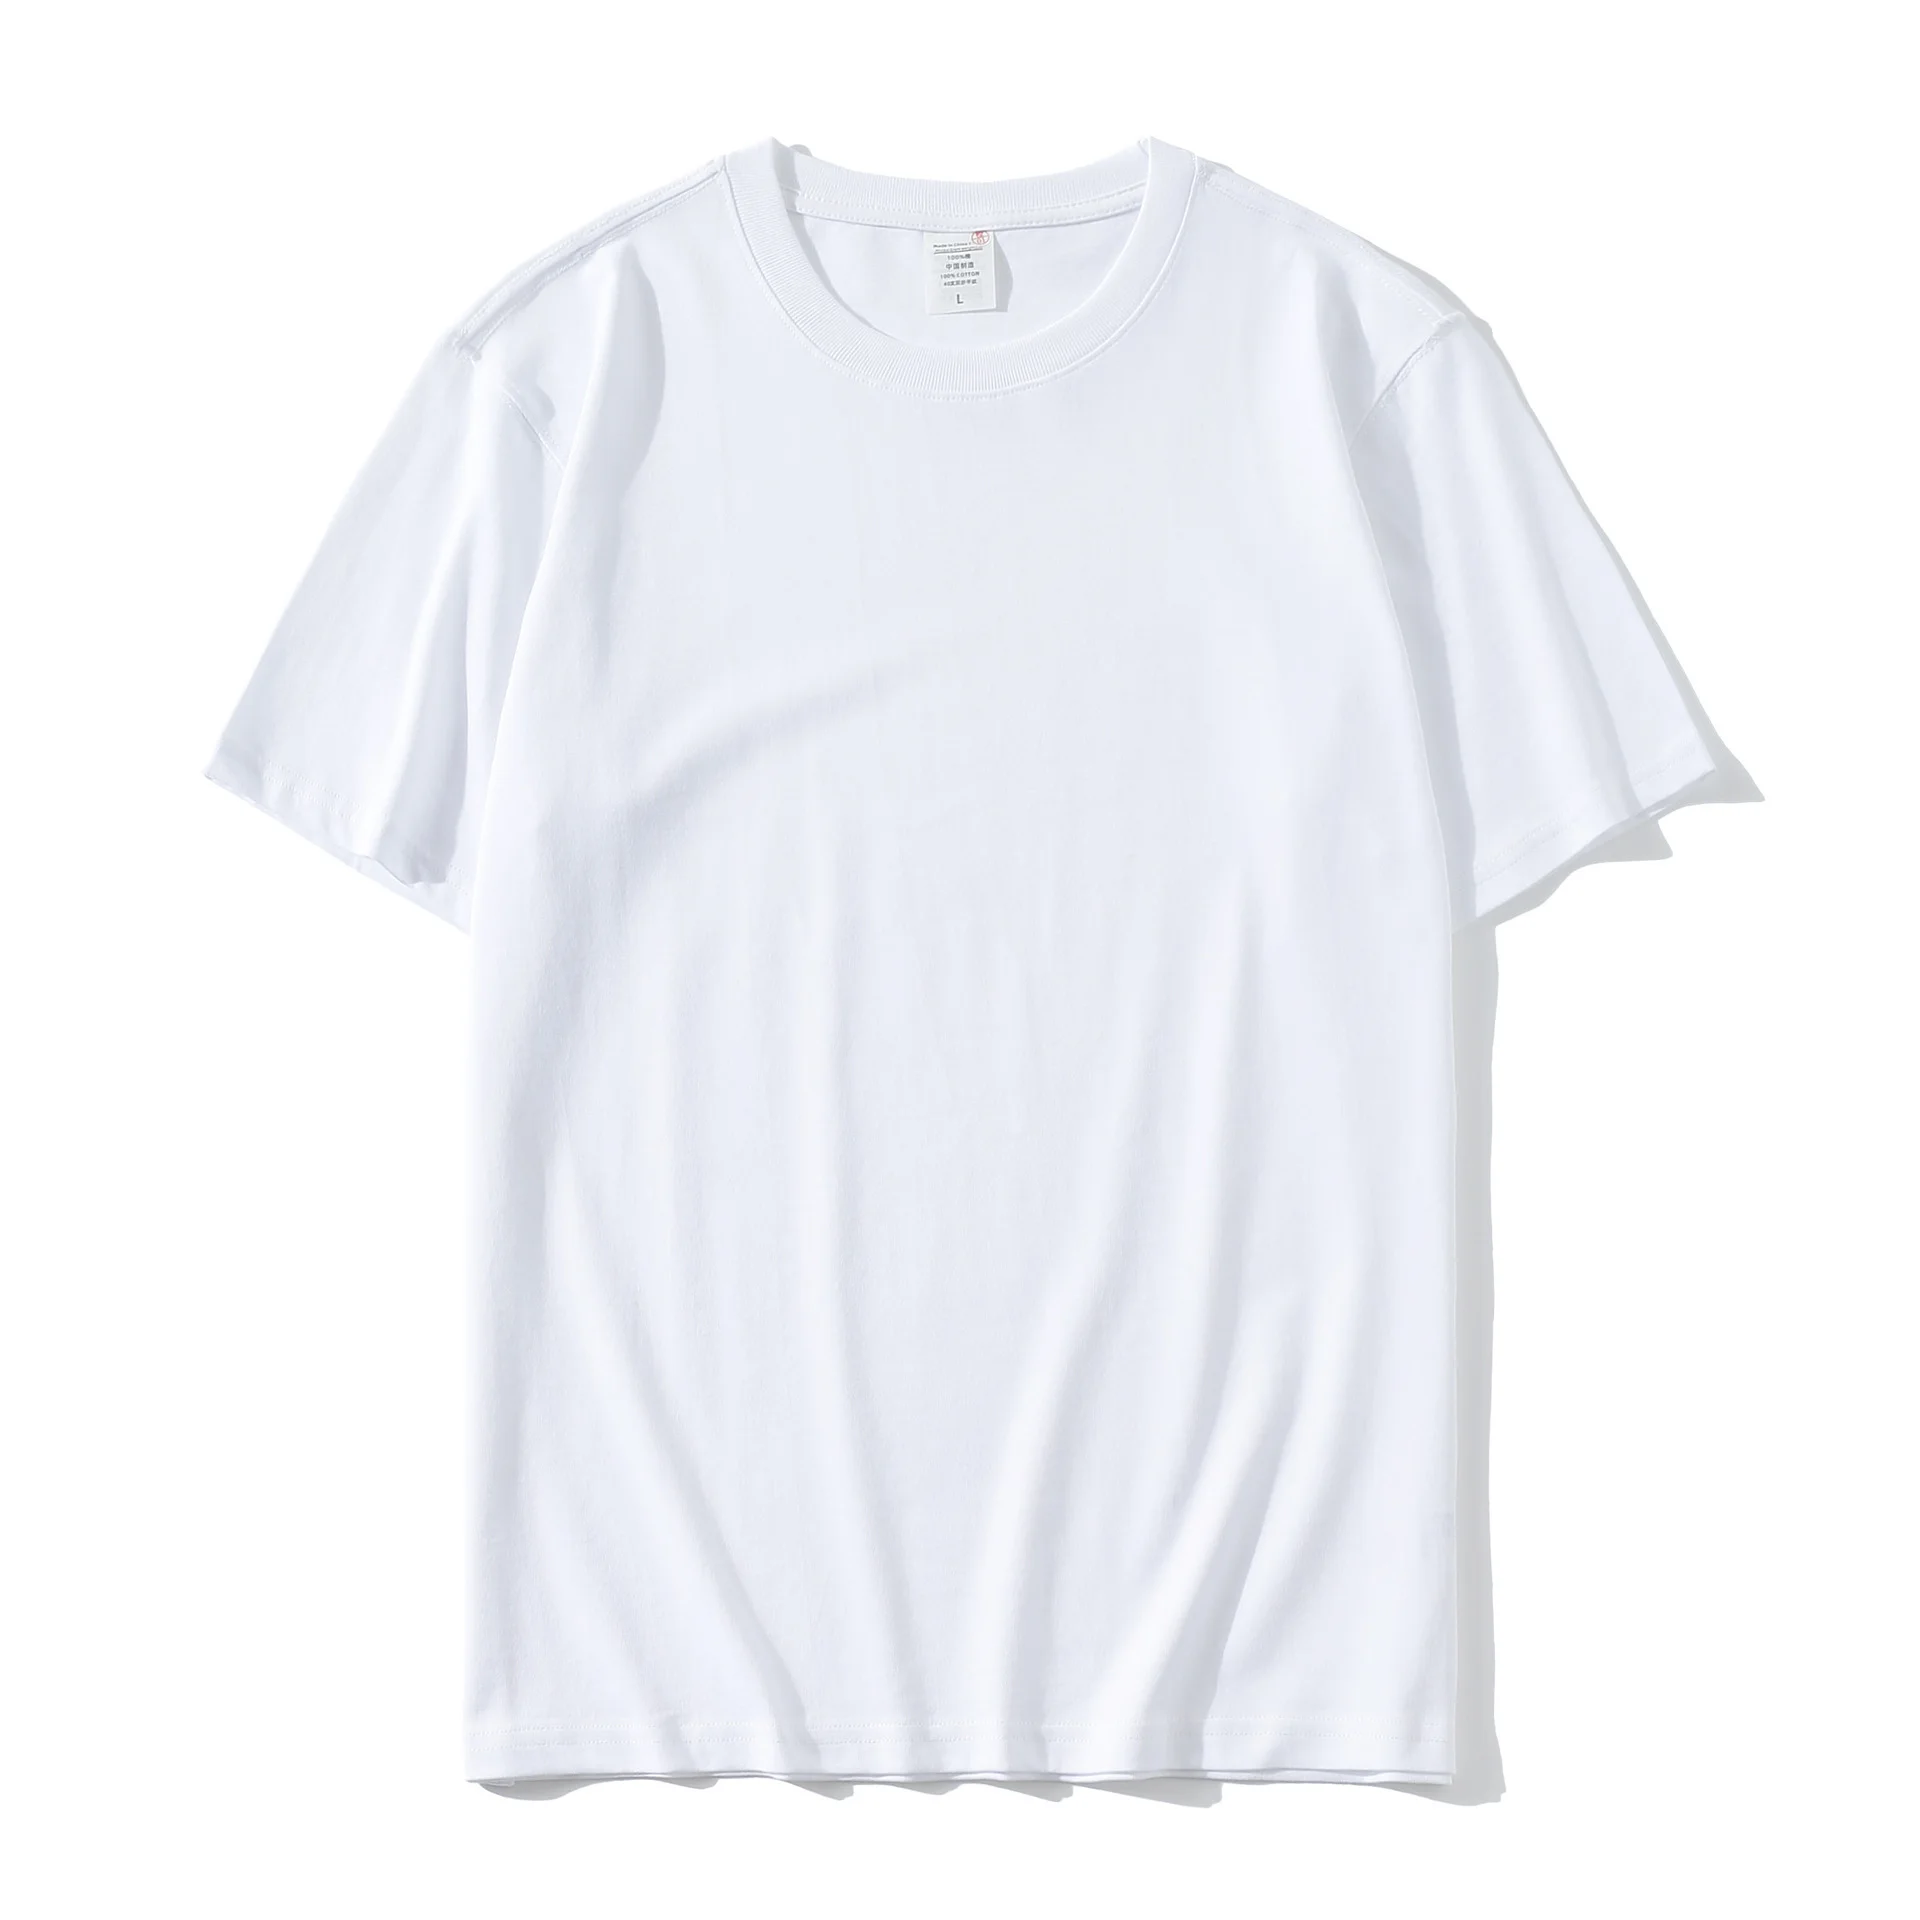 Wholesale Blank T shirts for Printing in Pushkino